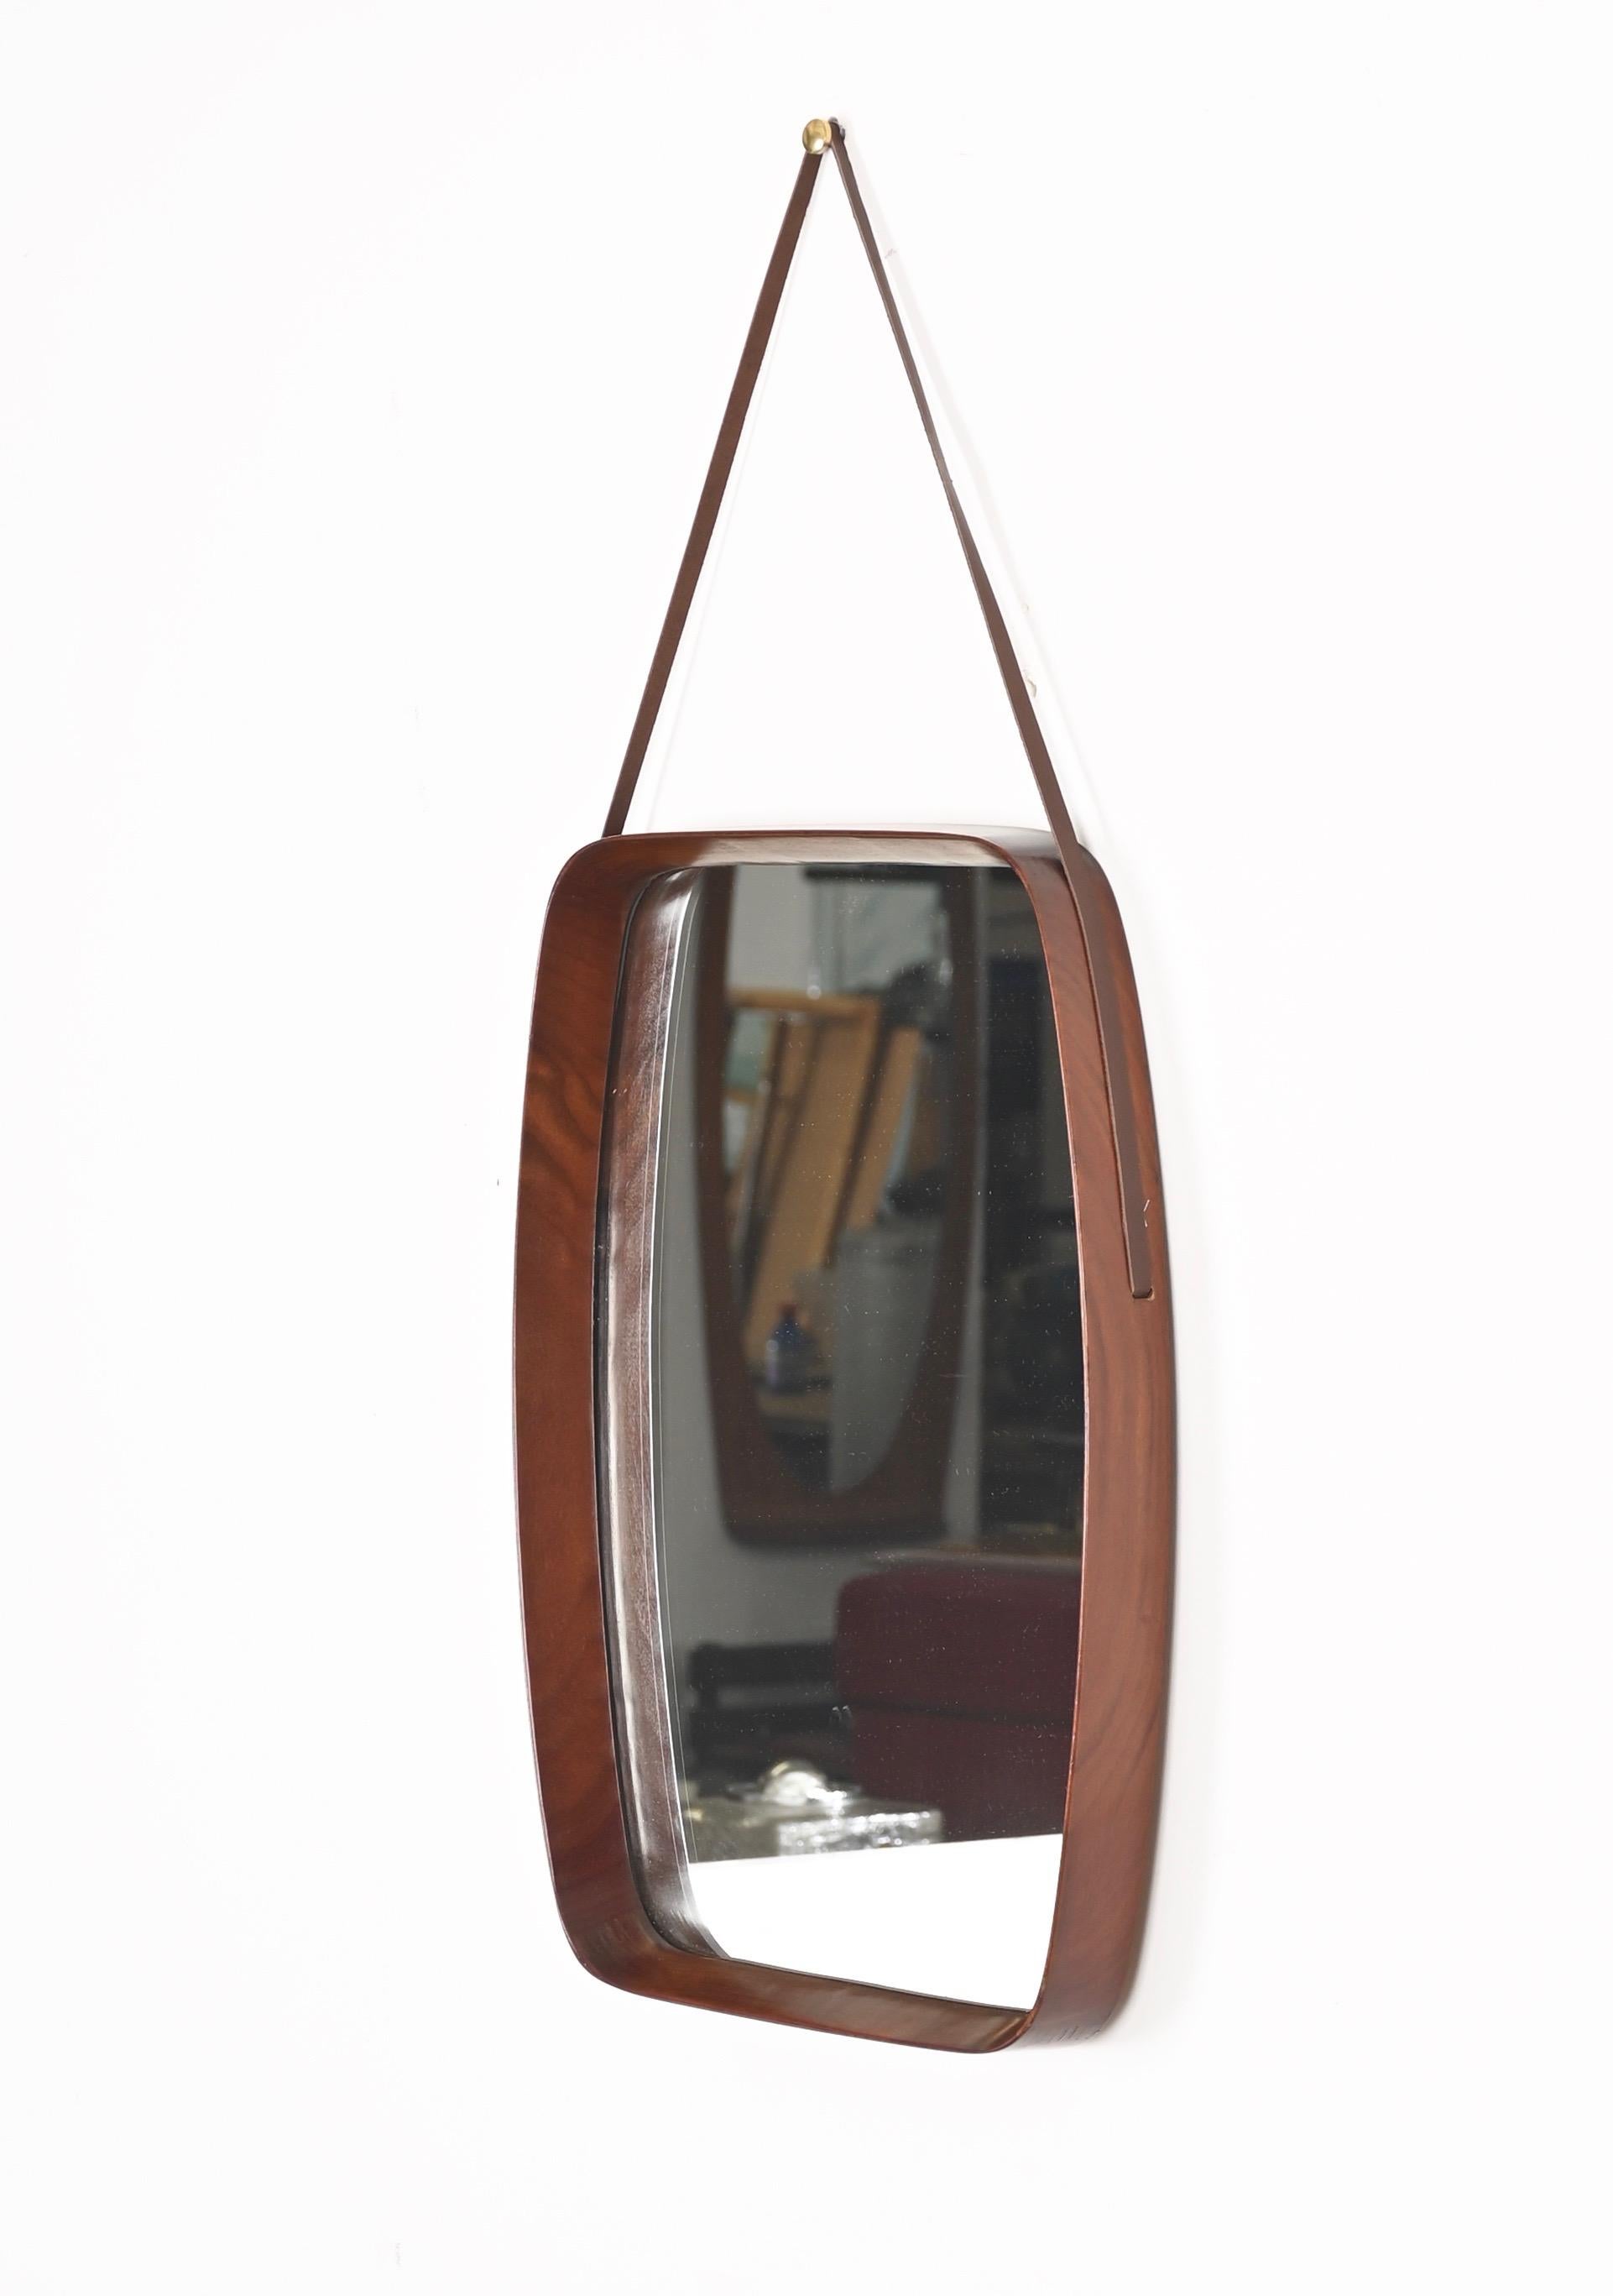 Italian Mid-Century Rectangular Mirror in Teak, Leather by Campo & Graffi, Italy 1960s For Sale